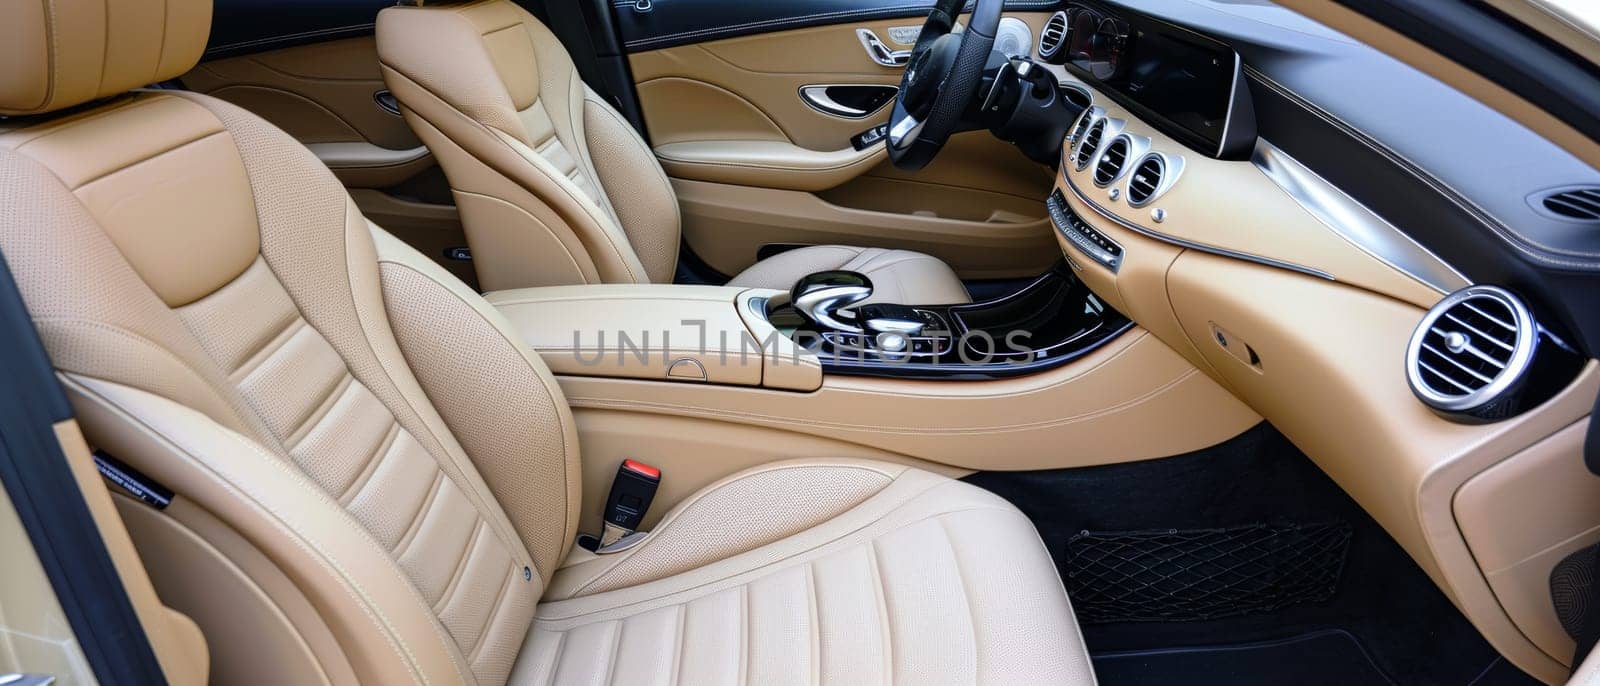 The opulent interior of a vehicle is bathed in warm tones, highlighting the fine leather seats and meticulous attention to detail, a hallmark of luxury and comfort in upscale automotive design